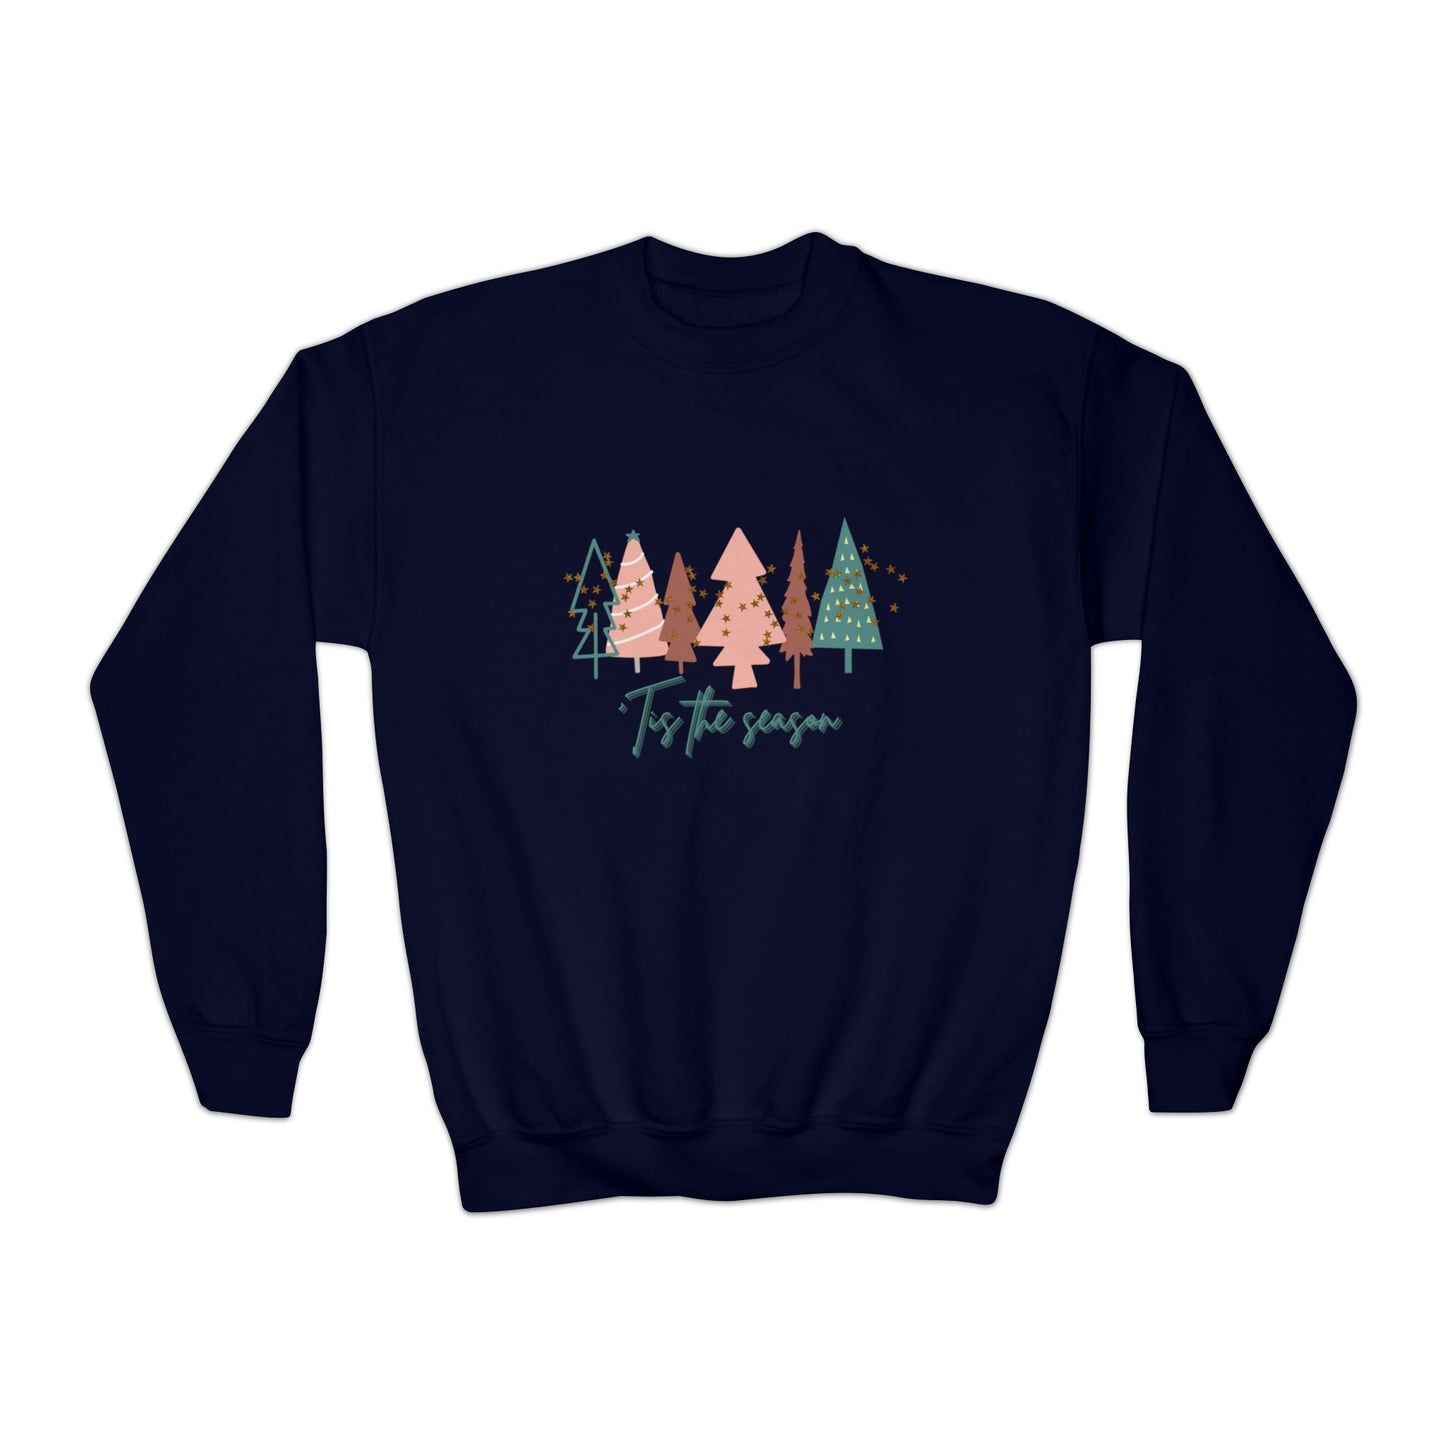 Embrace the cozy winter months with this festive Printify Christmas sweatshirt, showcasing the words "happy holidays" in navy.